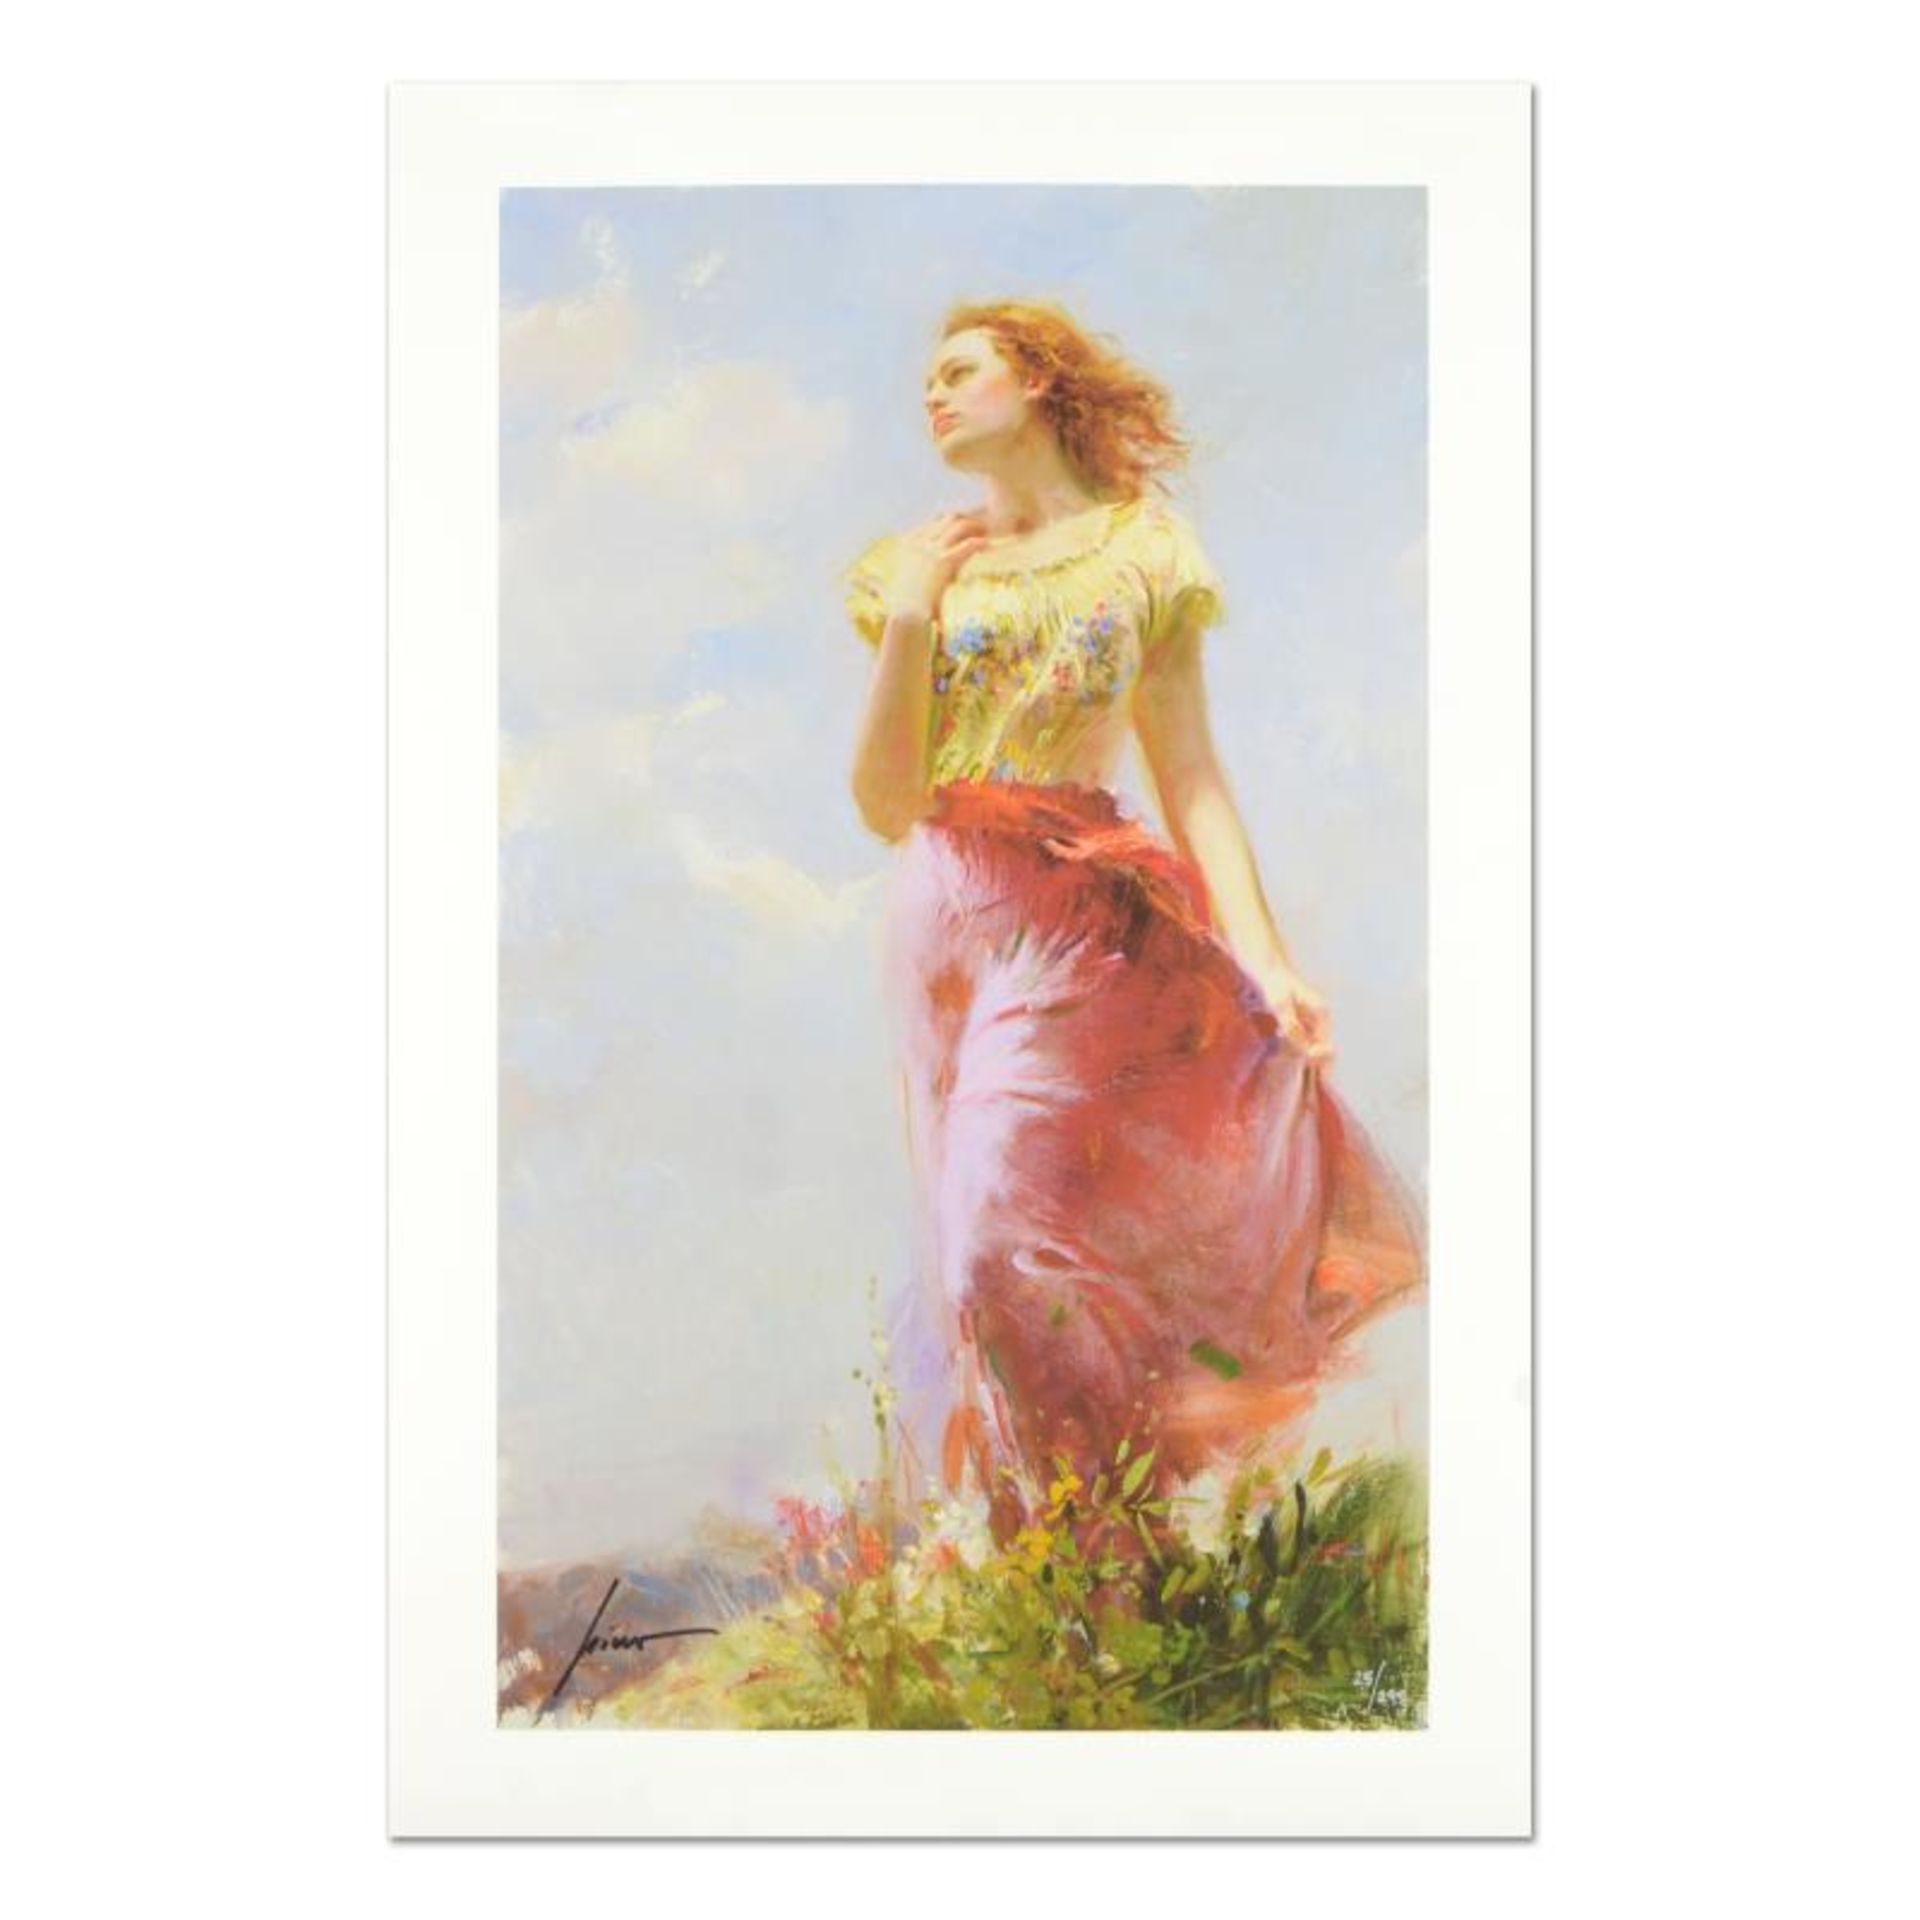 Pino (1939-2010) "Wind Swept" Limited Edition Giclee. Numbered and Hand Signed;